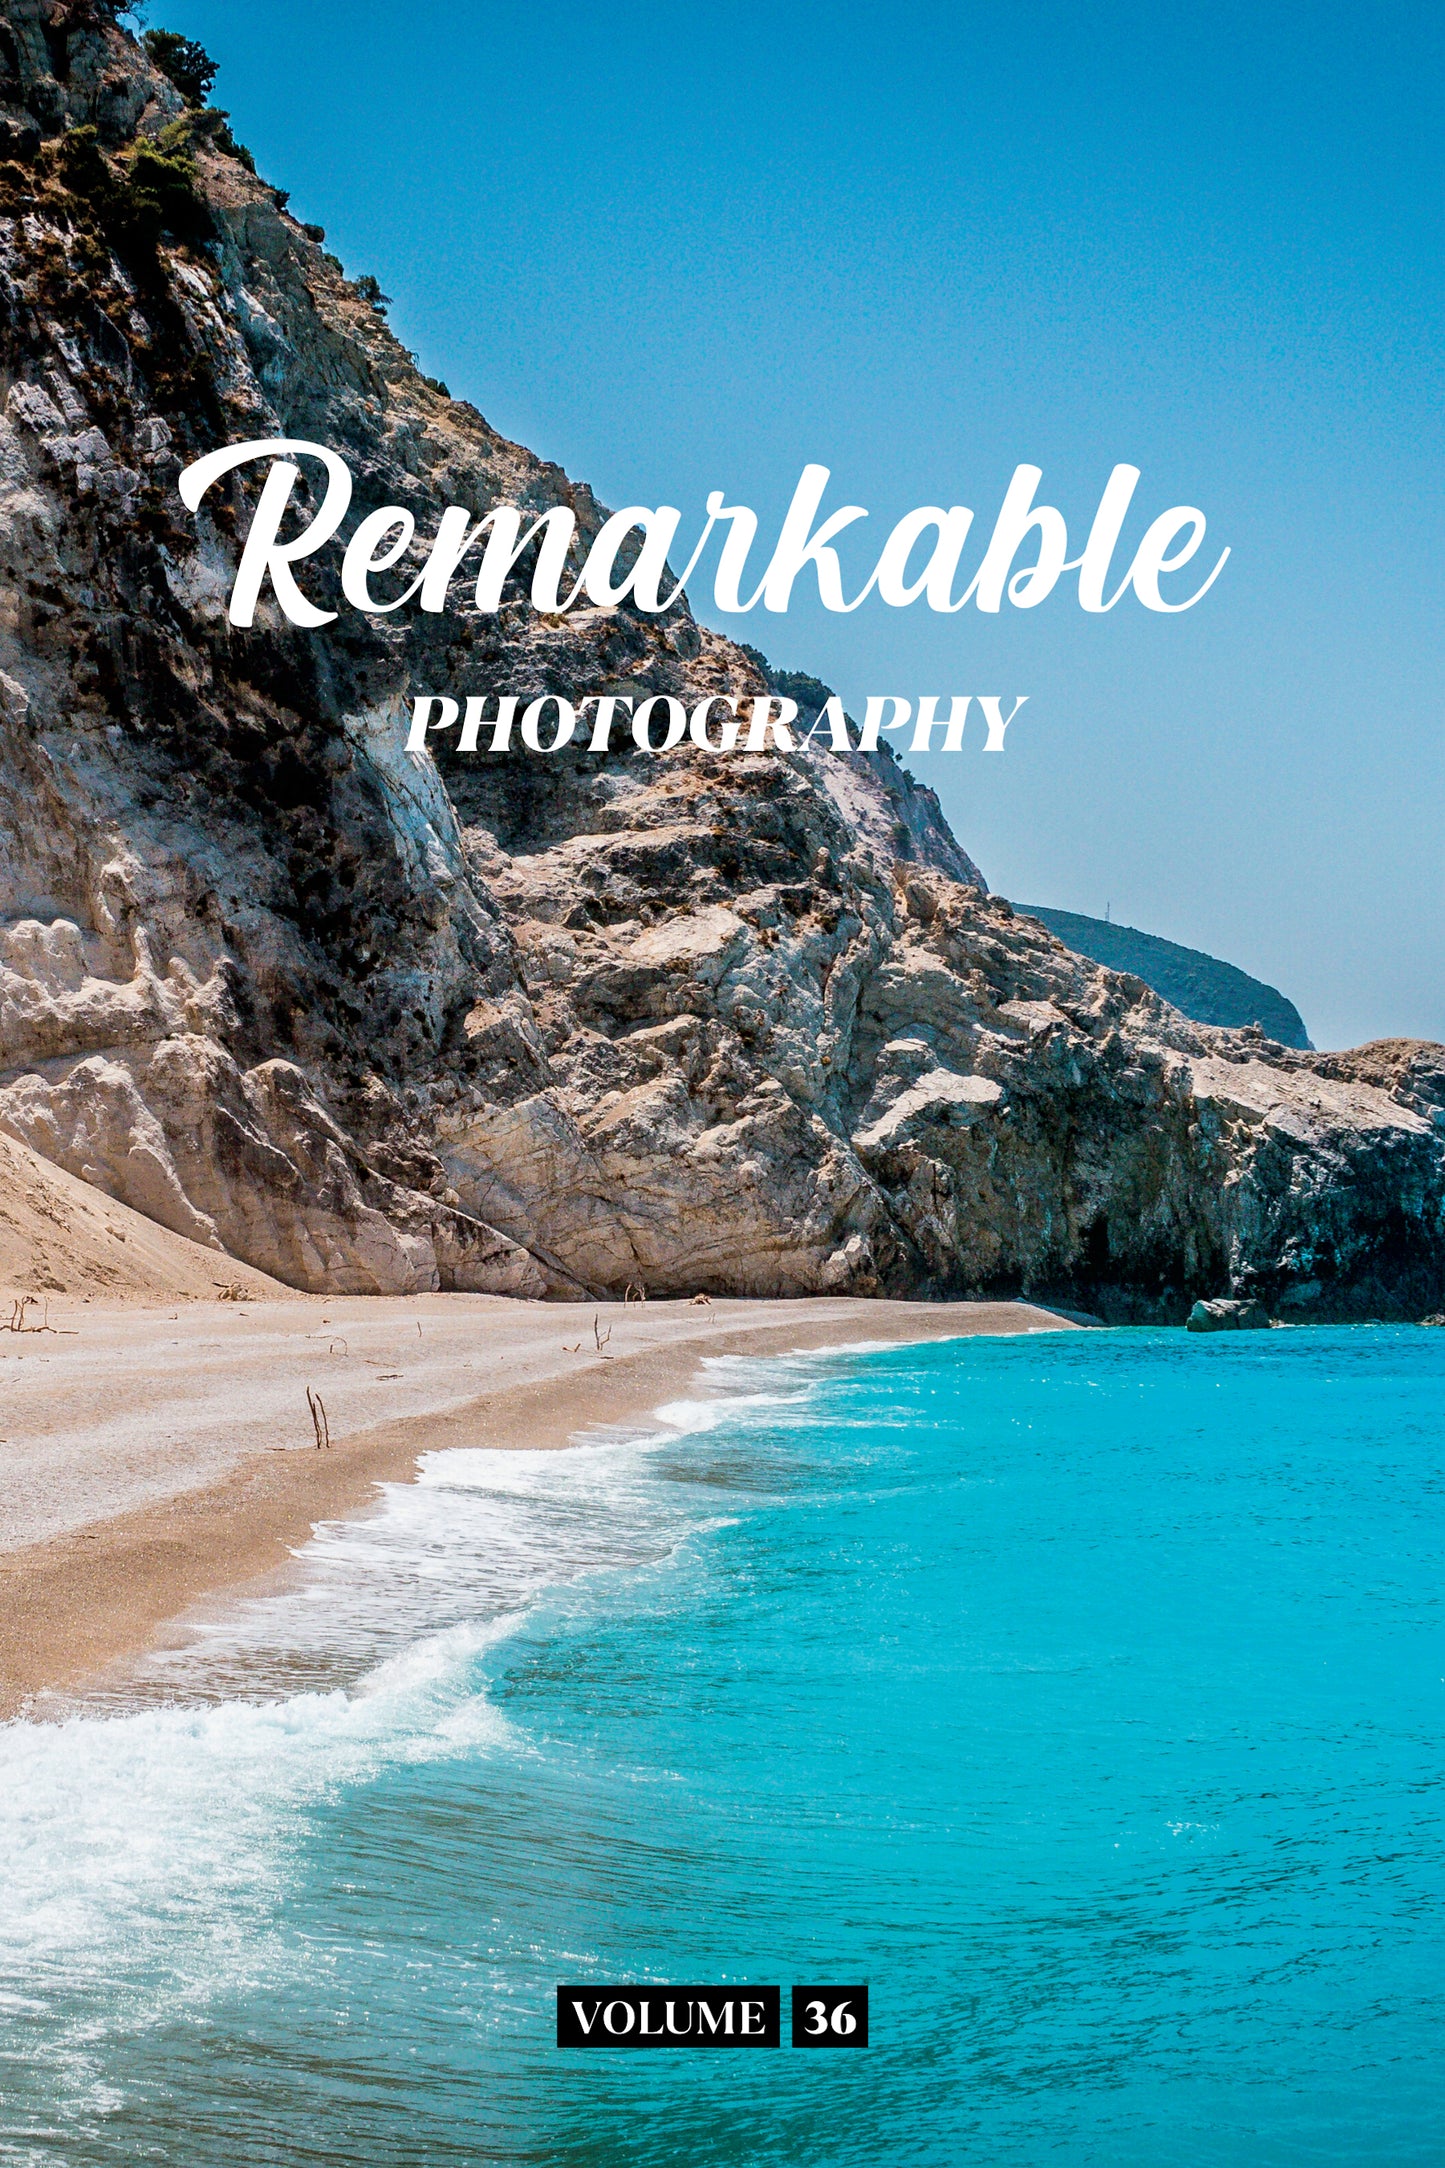 Remarkable Photography Volume 36 (Physical Book Pre-Order)